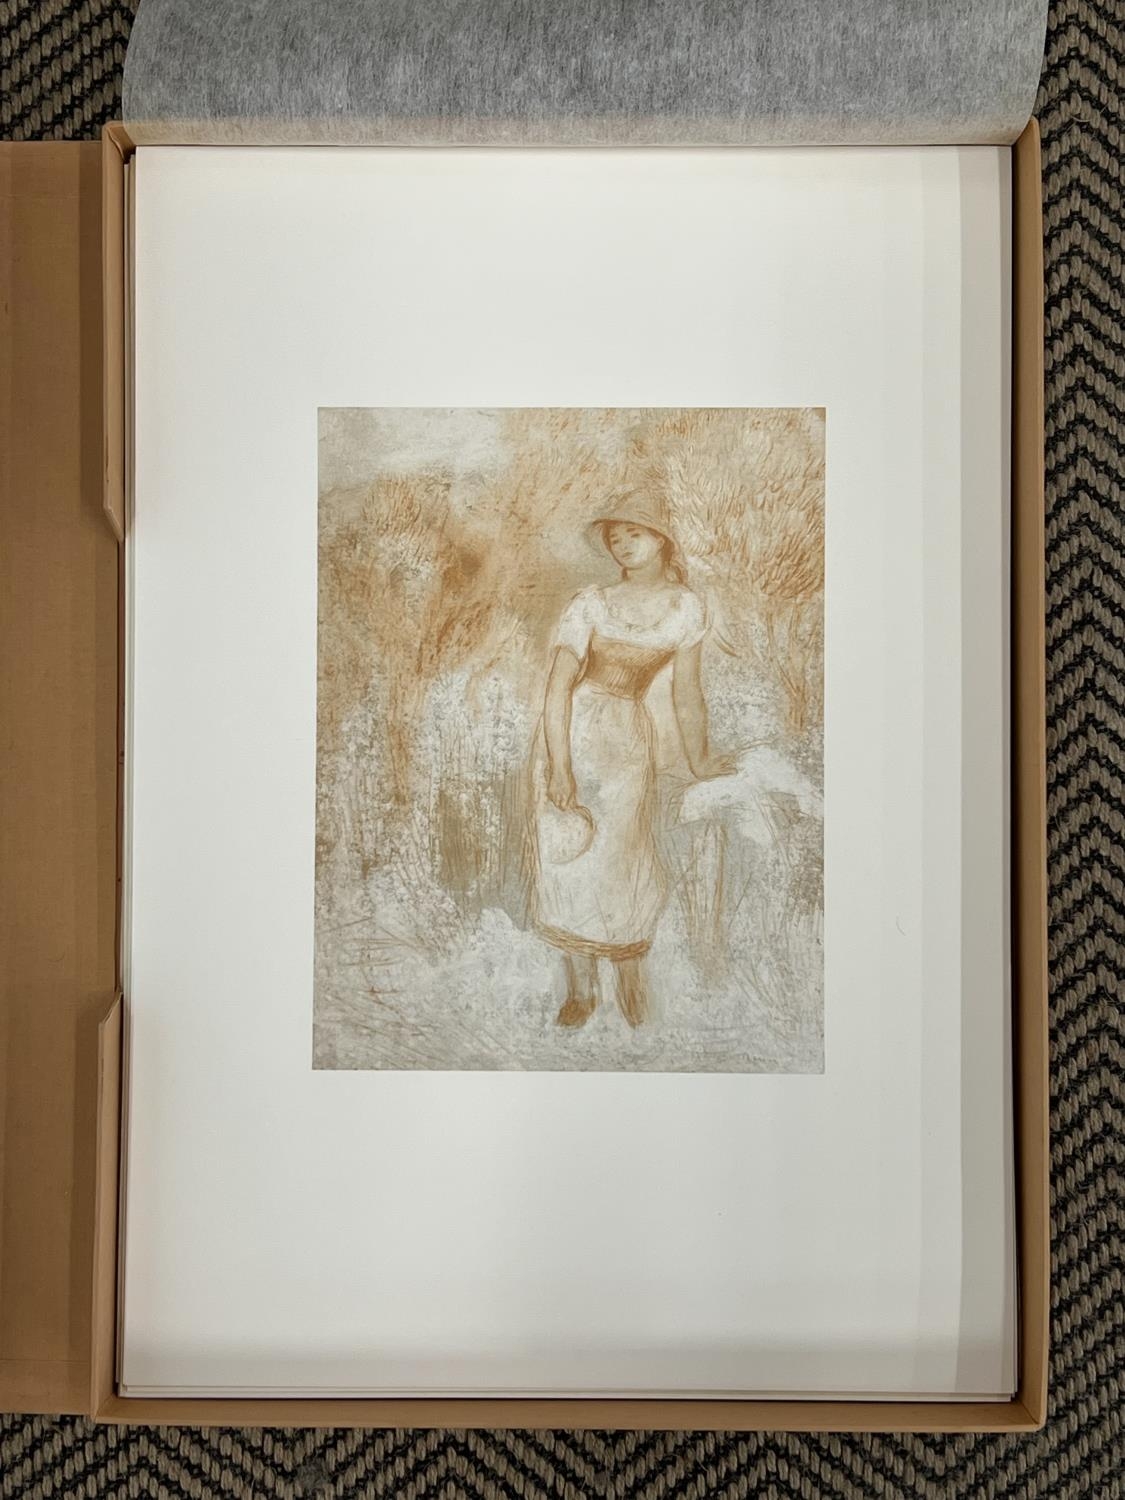 AFTER PIERRE AUGUSTE RENOIR, a folio of 24 off-set lithographs printed by Cartiere Miliani di - Image 11 of 28